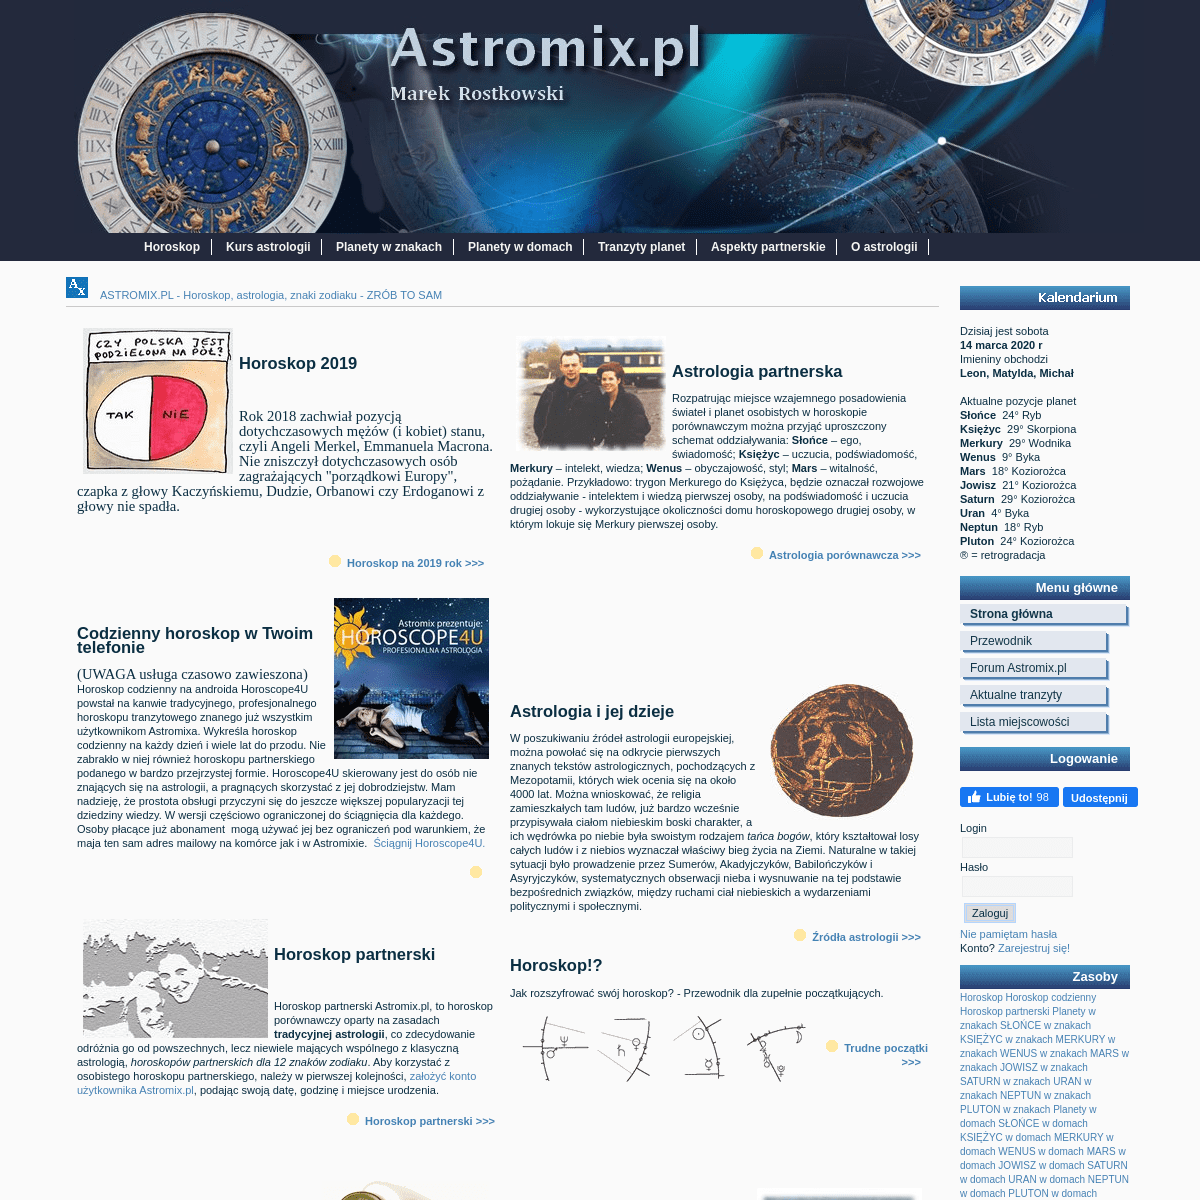 A complete backup of astromix.pl